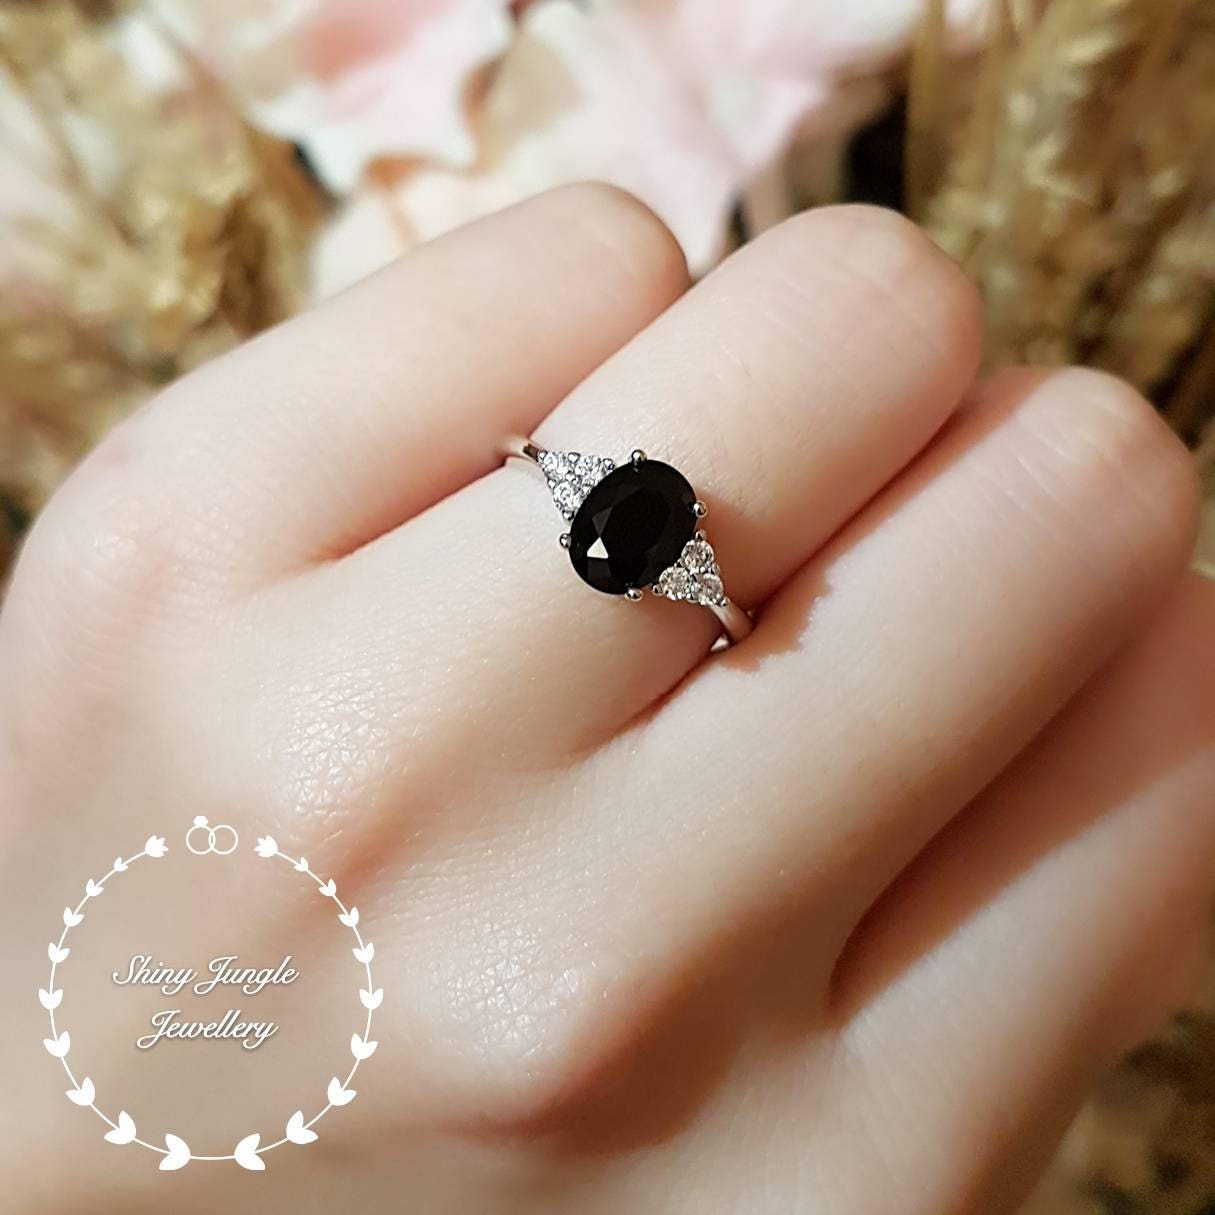 Dainty Marquise Cut Black Spinel Gemstones Jewelry Gift Silver Ring Size 6 7 8 9 